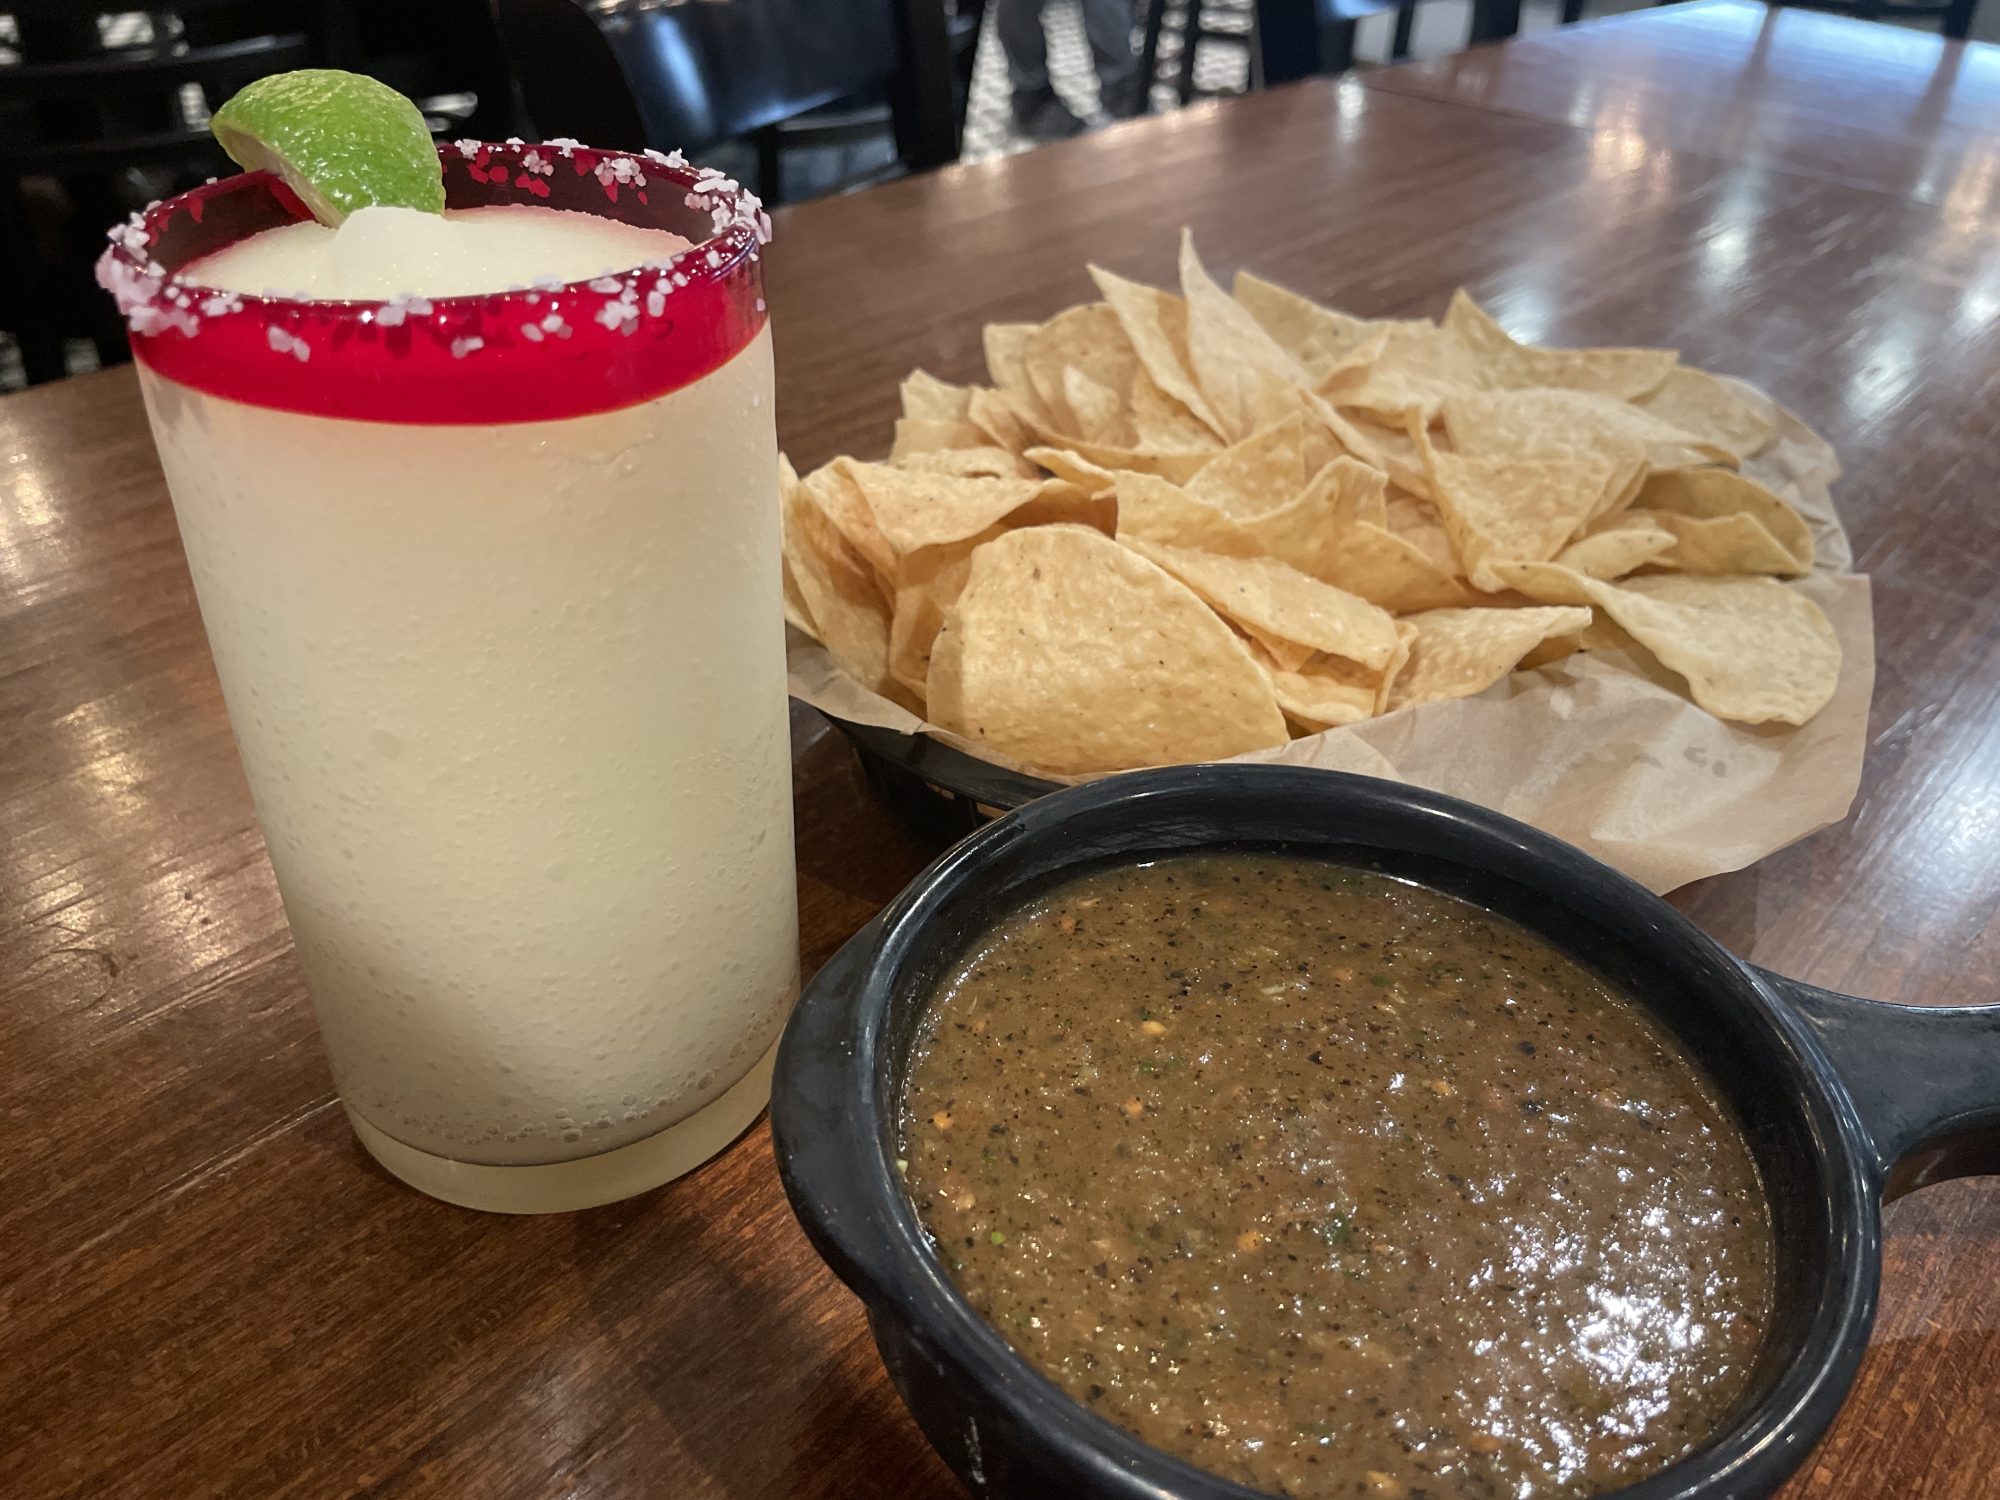 Torchy’s Frozen Marg & Chips and Salsa